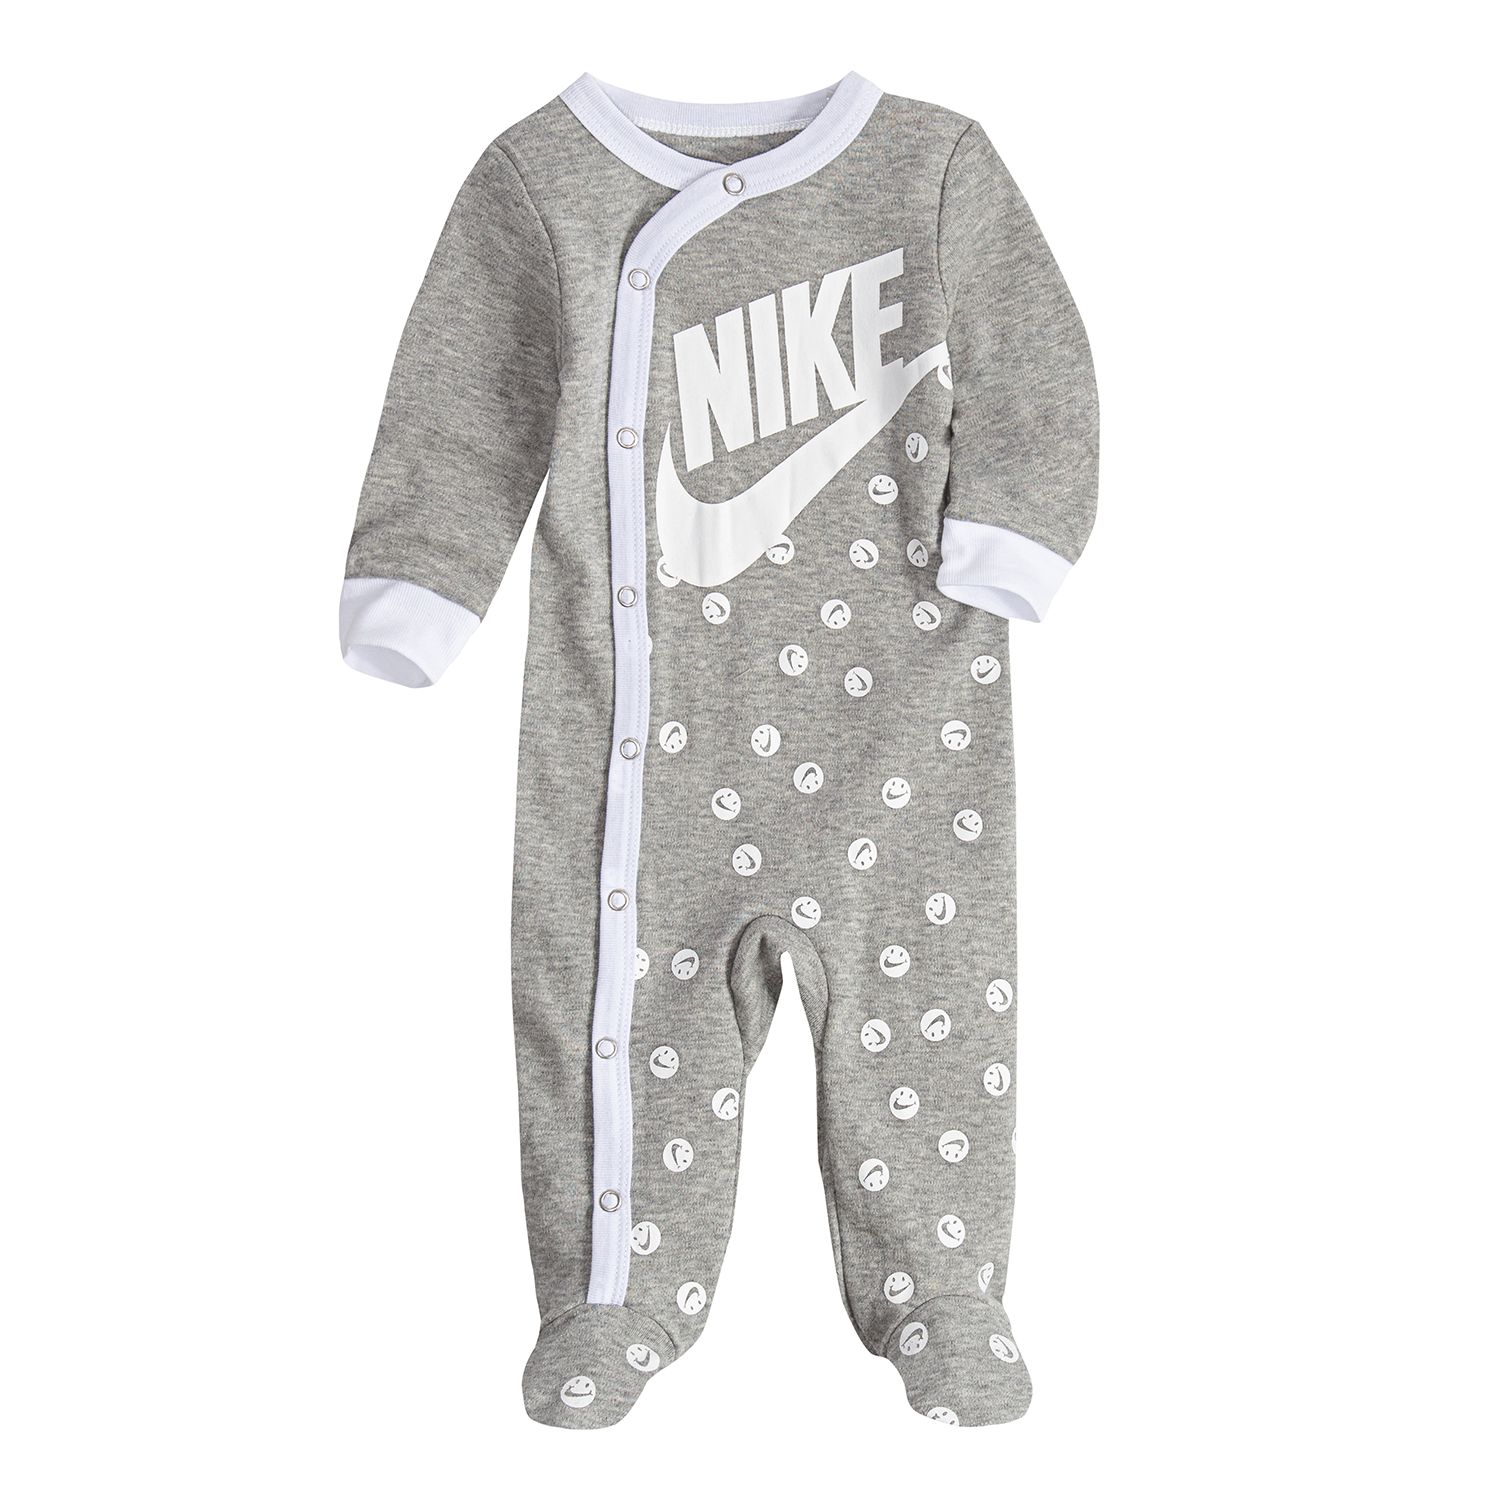 nike baby clothes 9 months